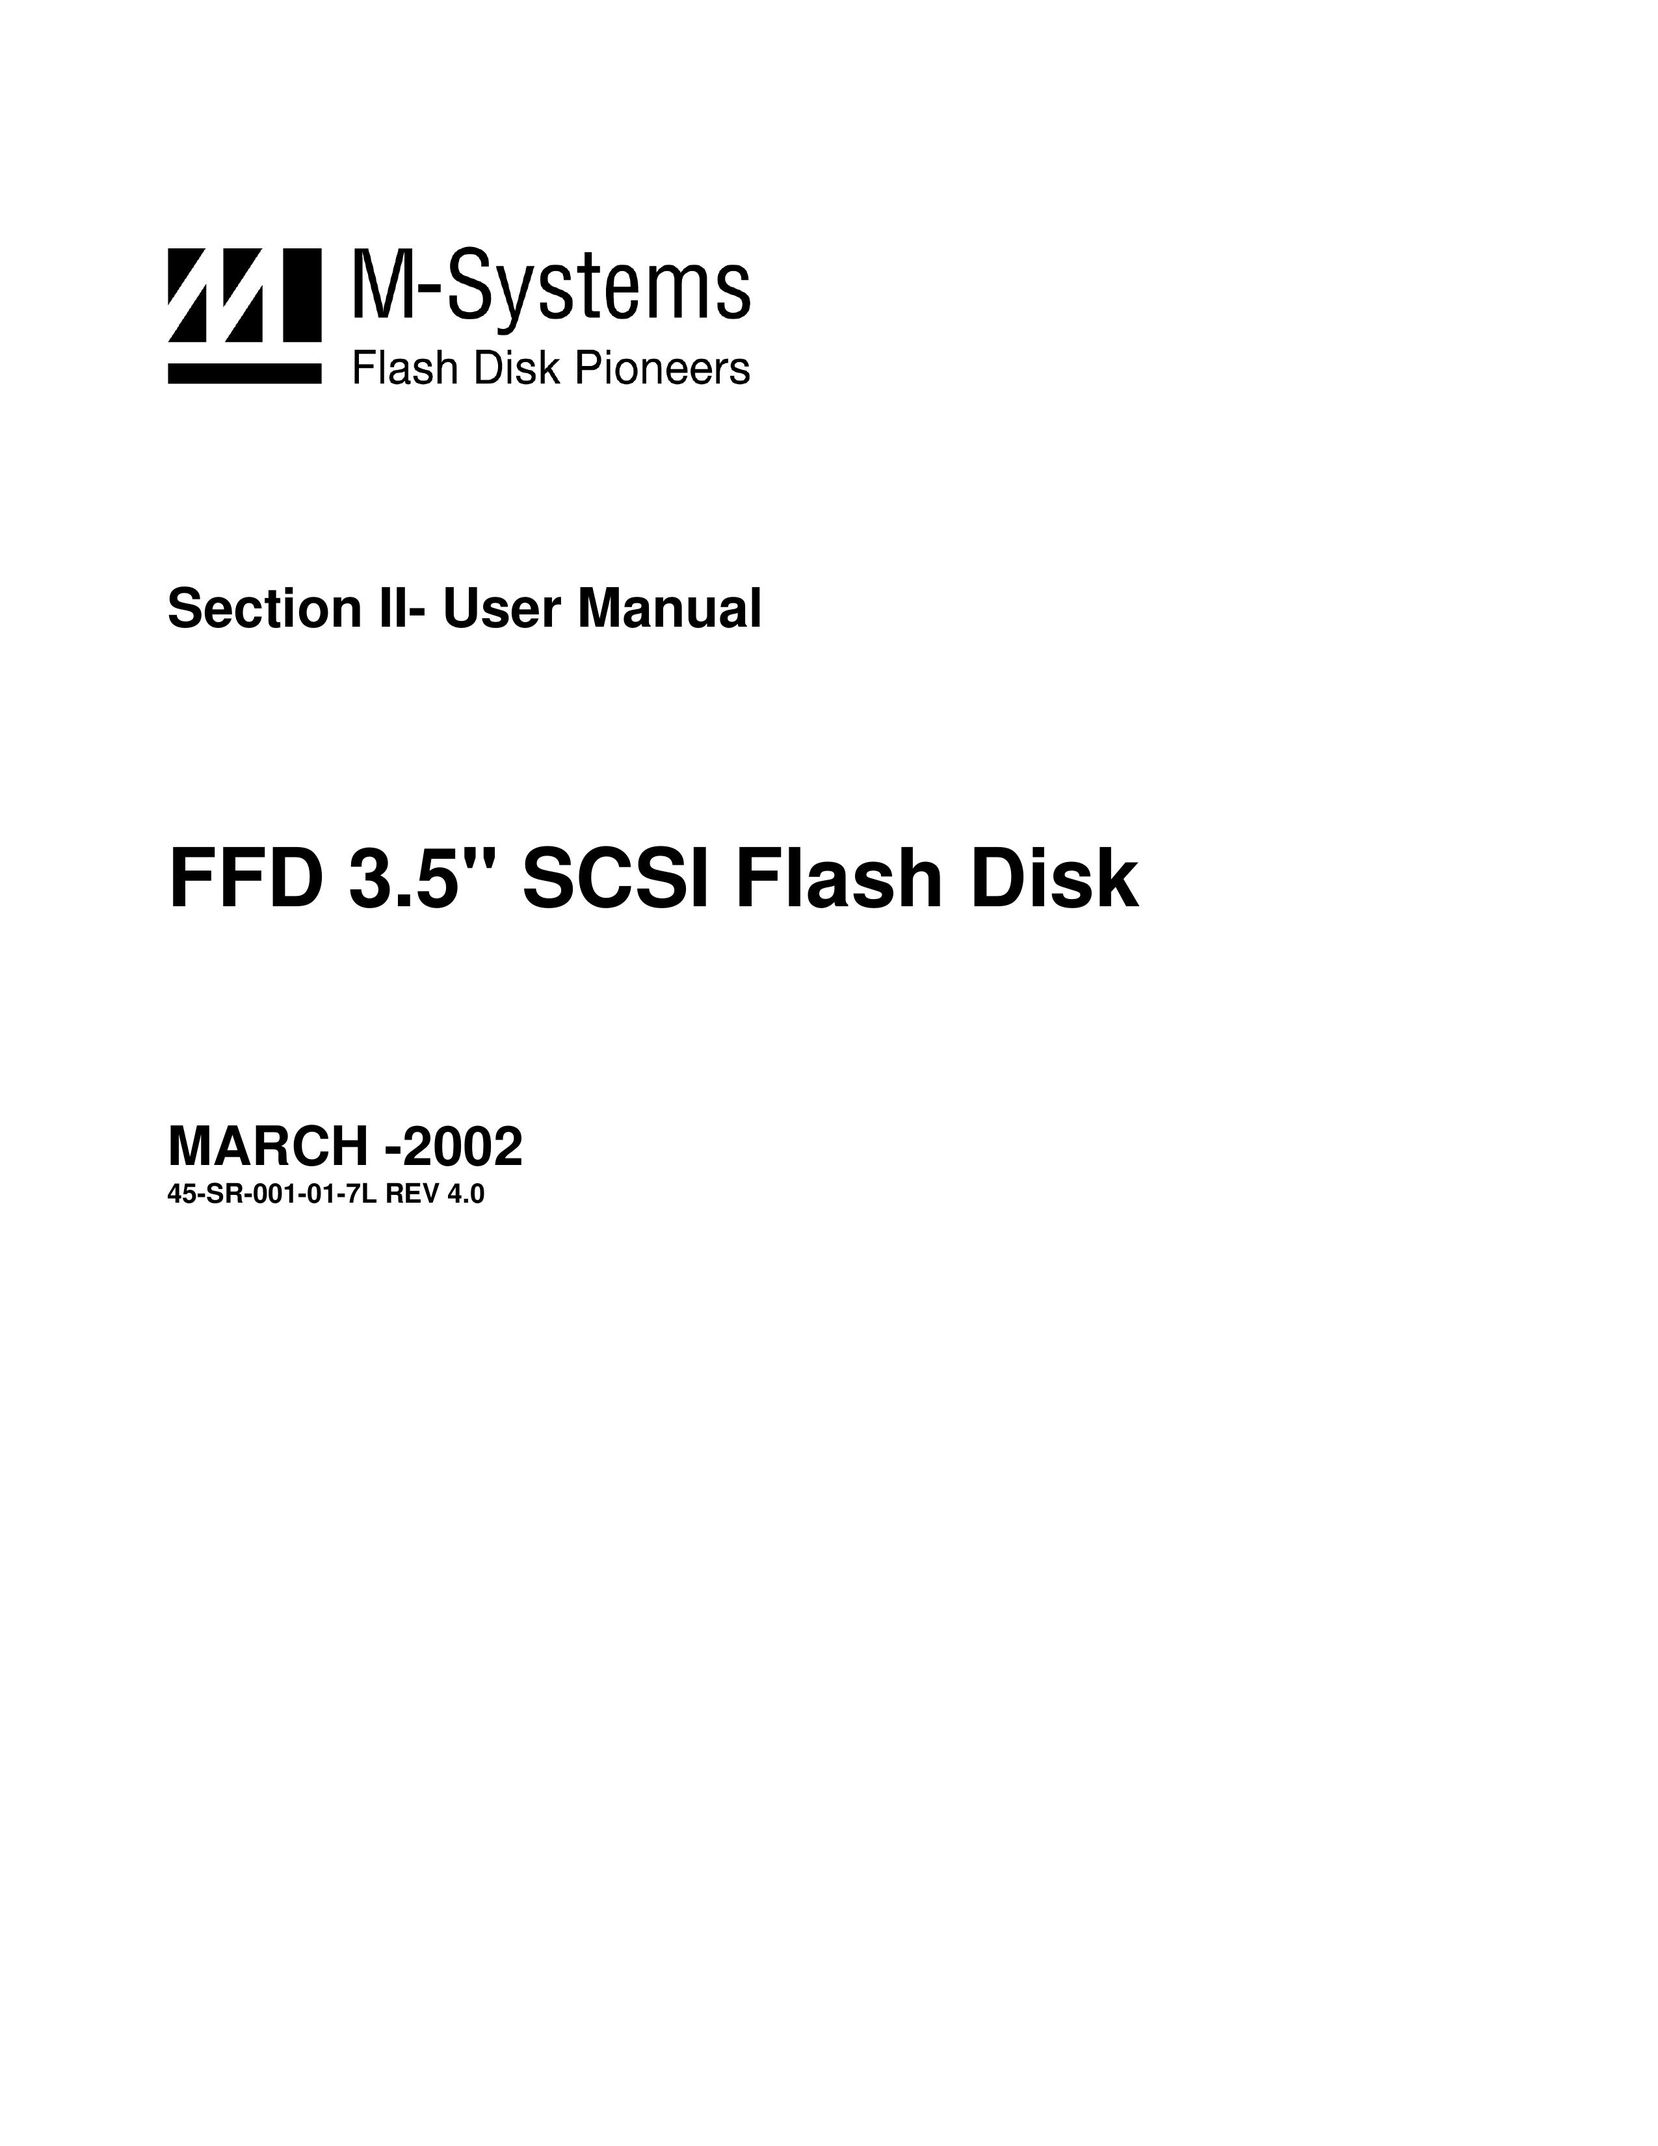 M-Systems Flash Disk Pioneers 45-SR-001-01-7L Flash Memory User Manual